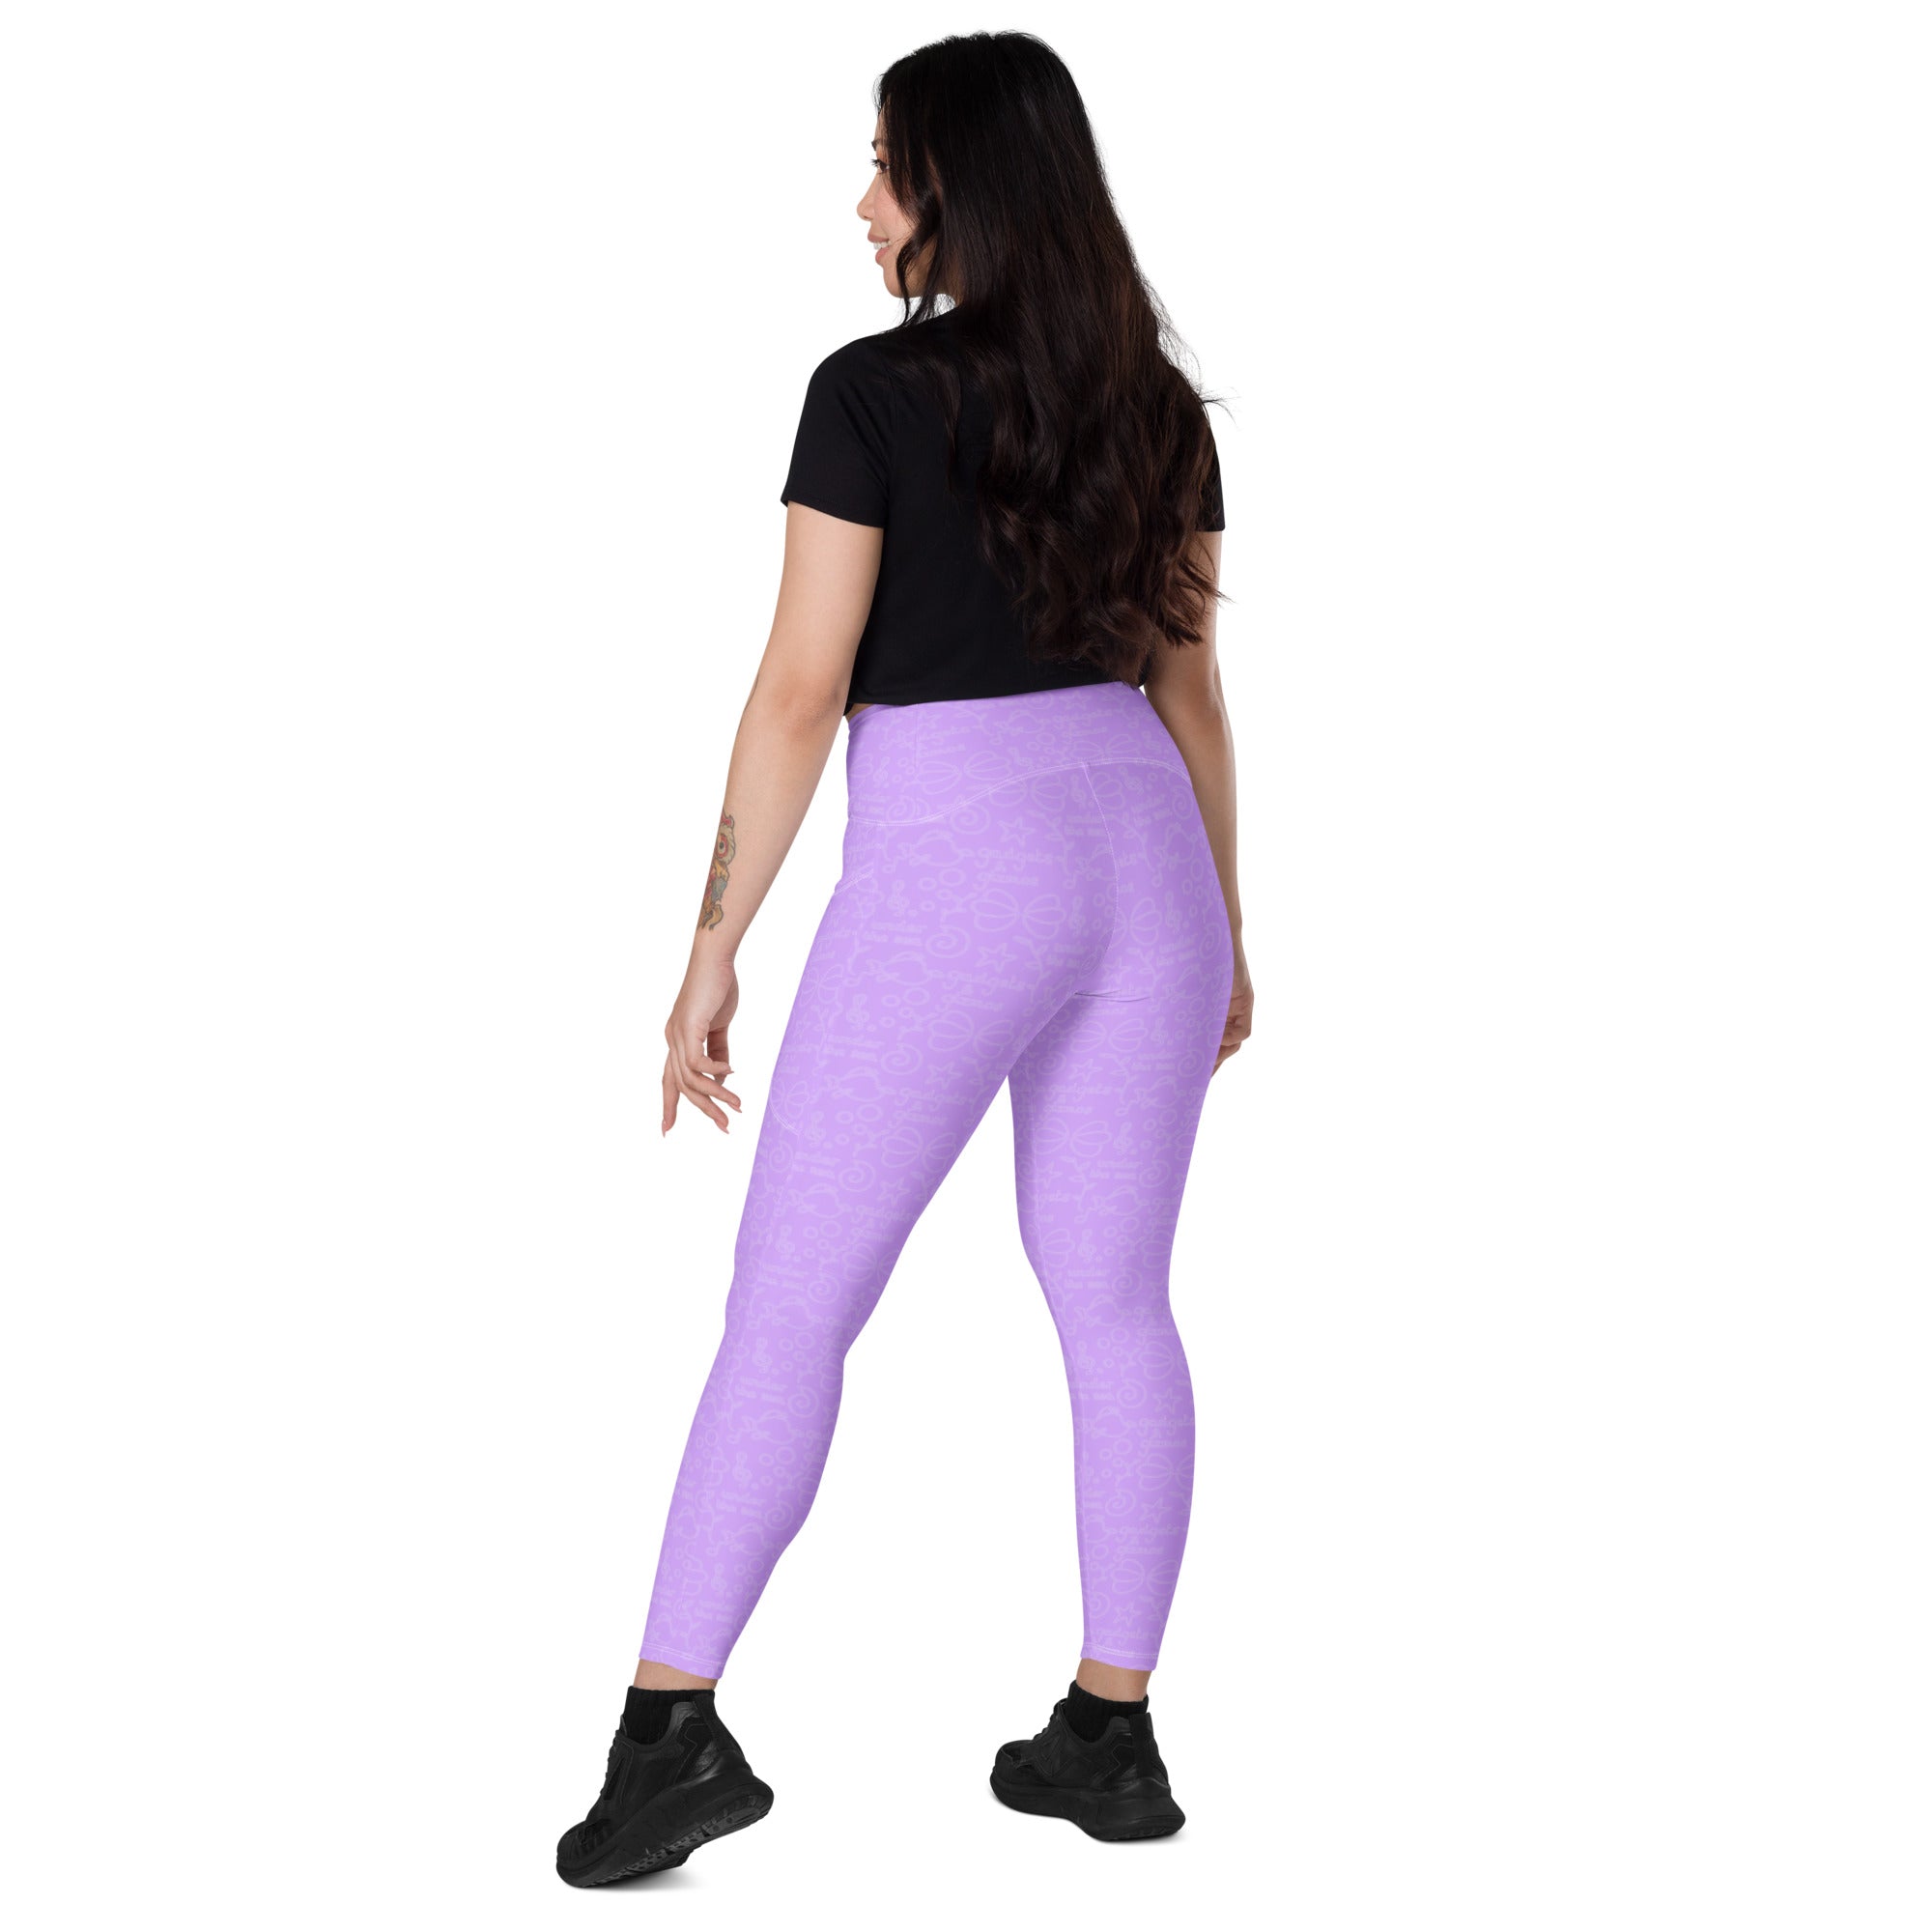 Ariel Leggings with pockets